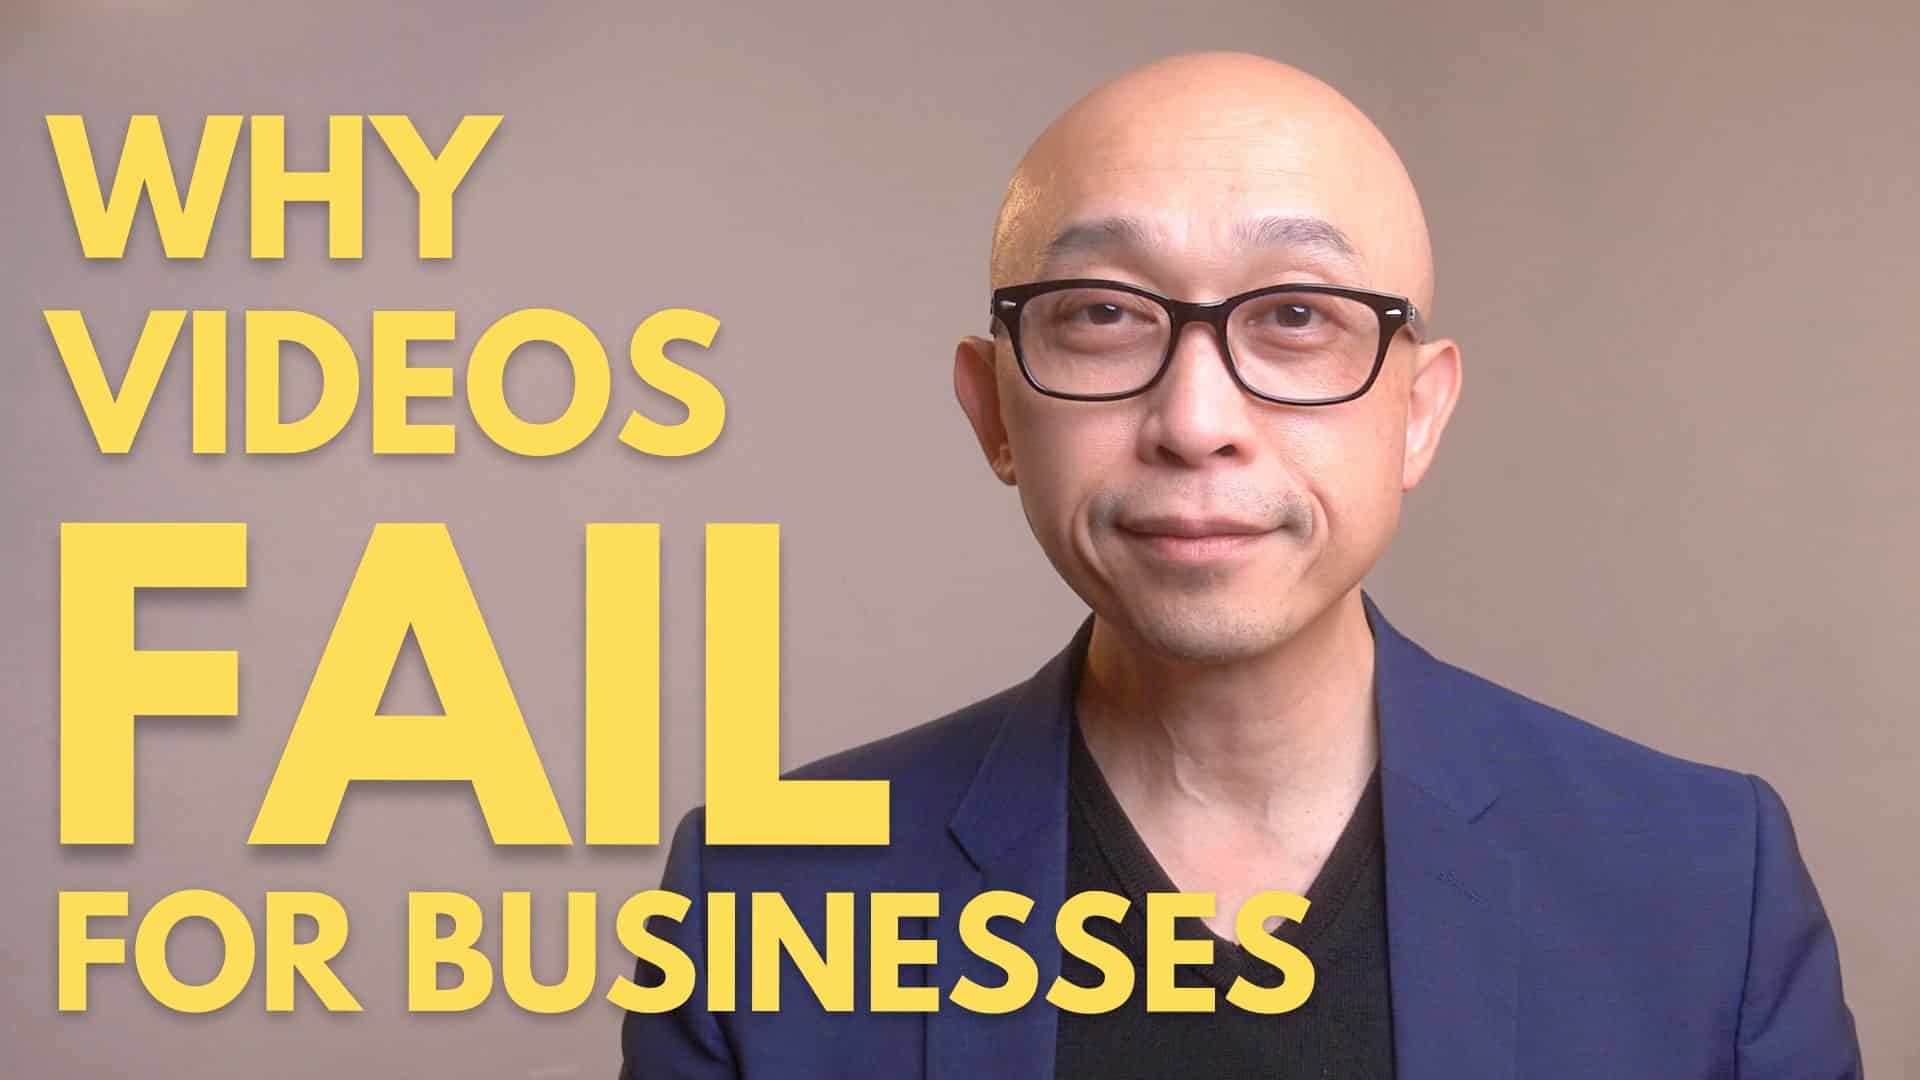 Why Videos Fail for Businesses